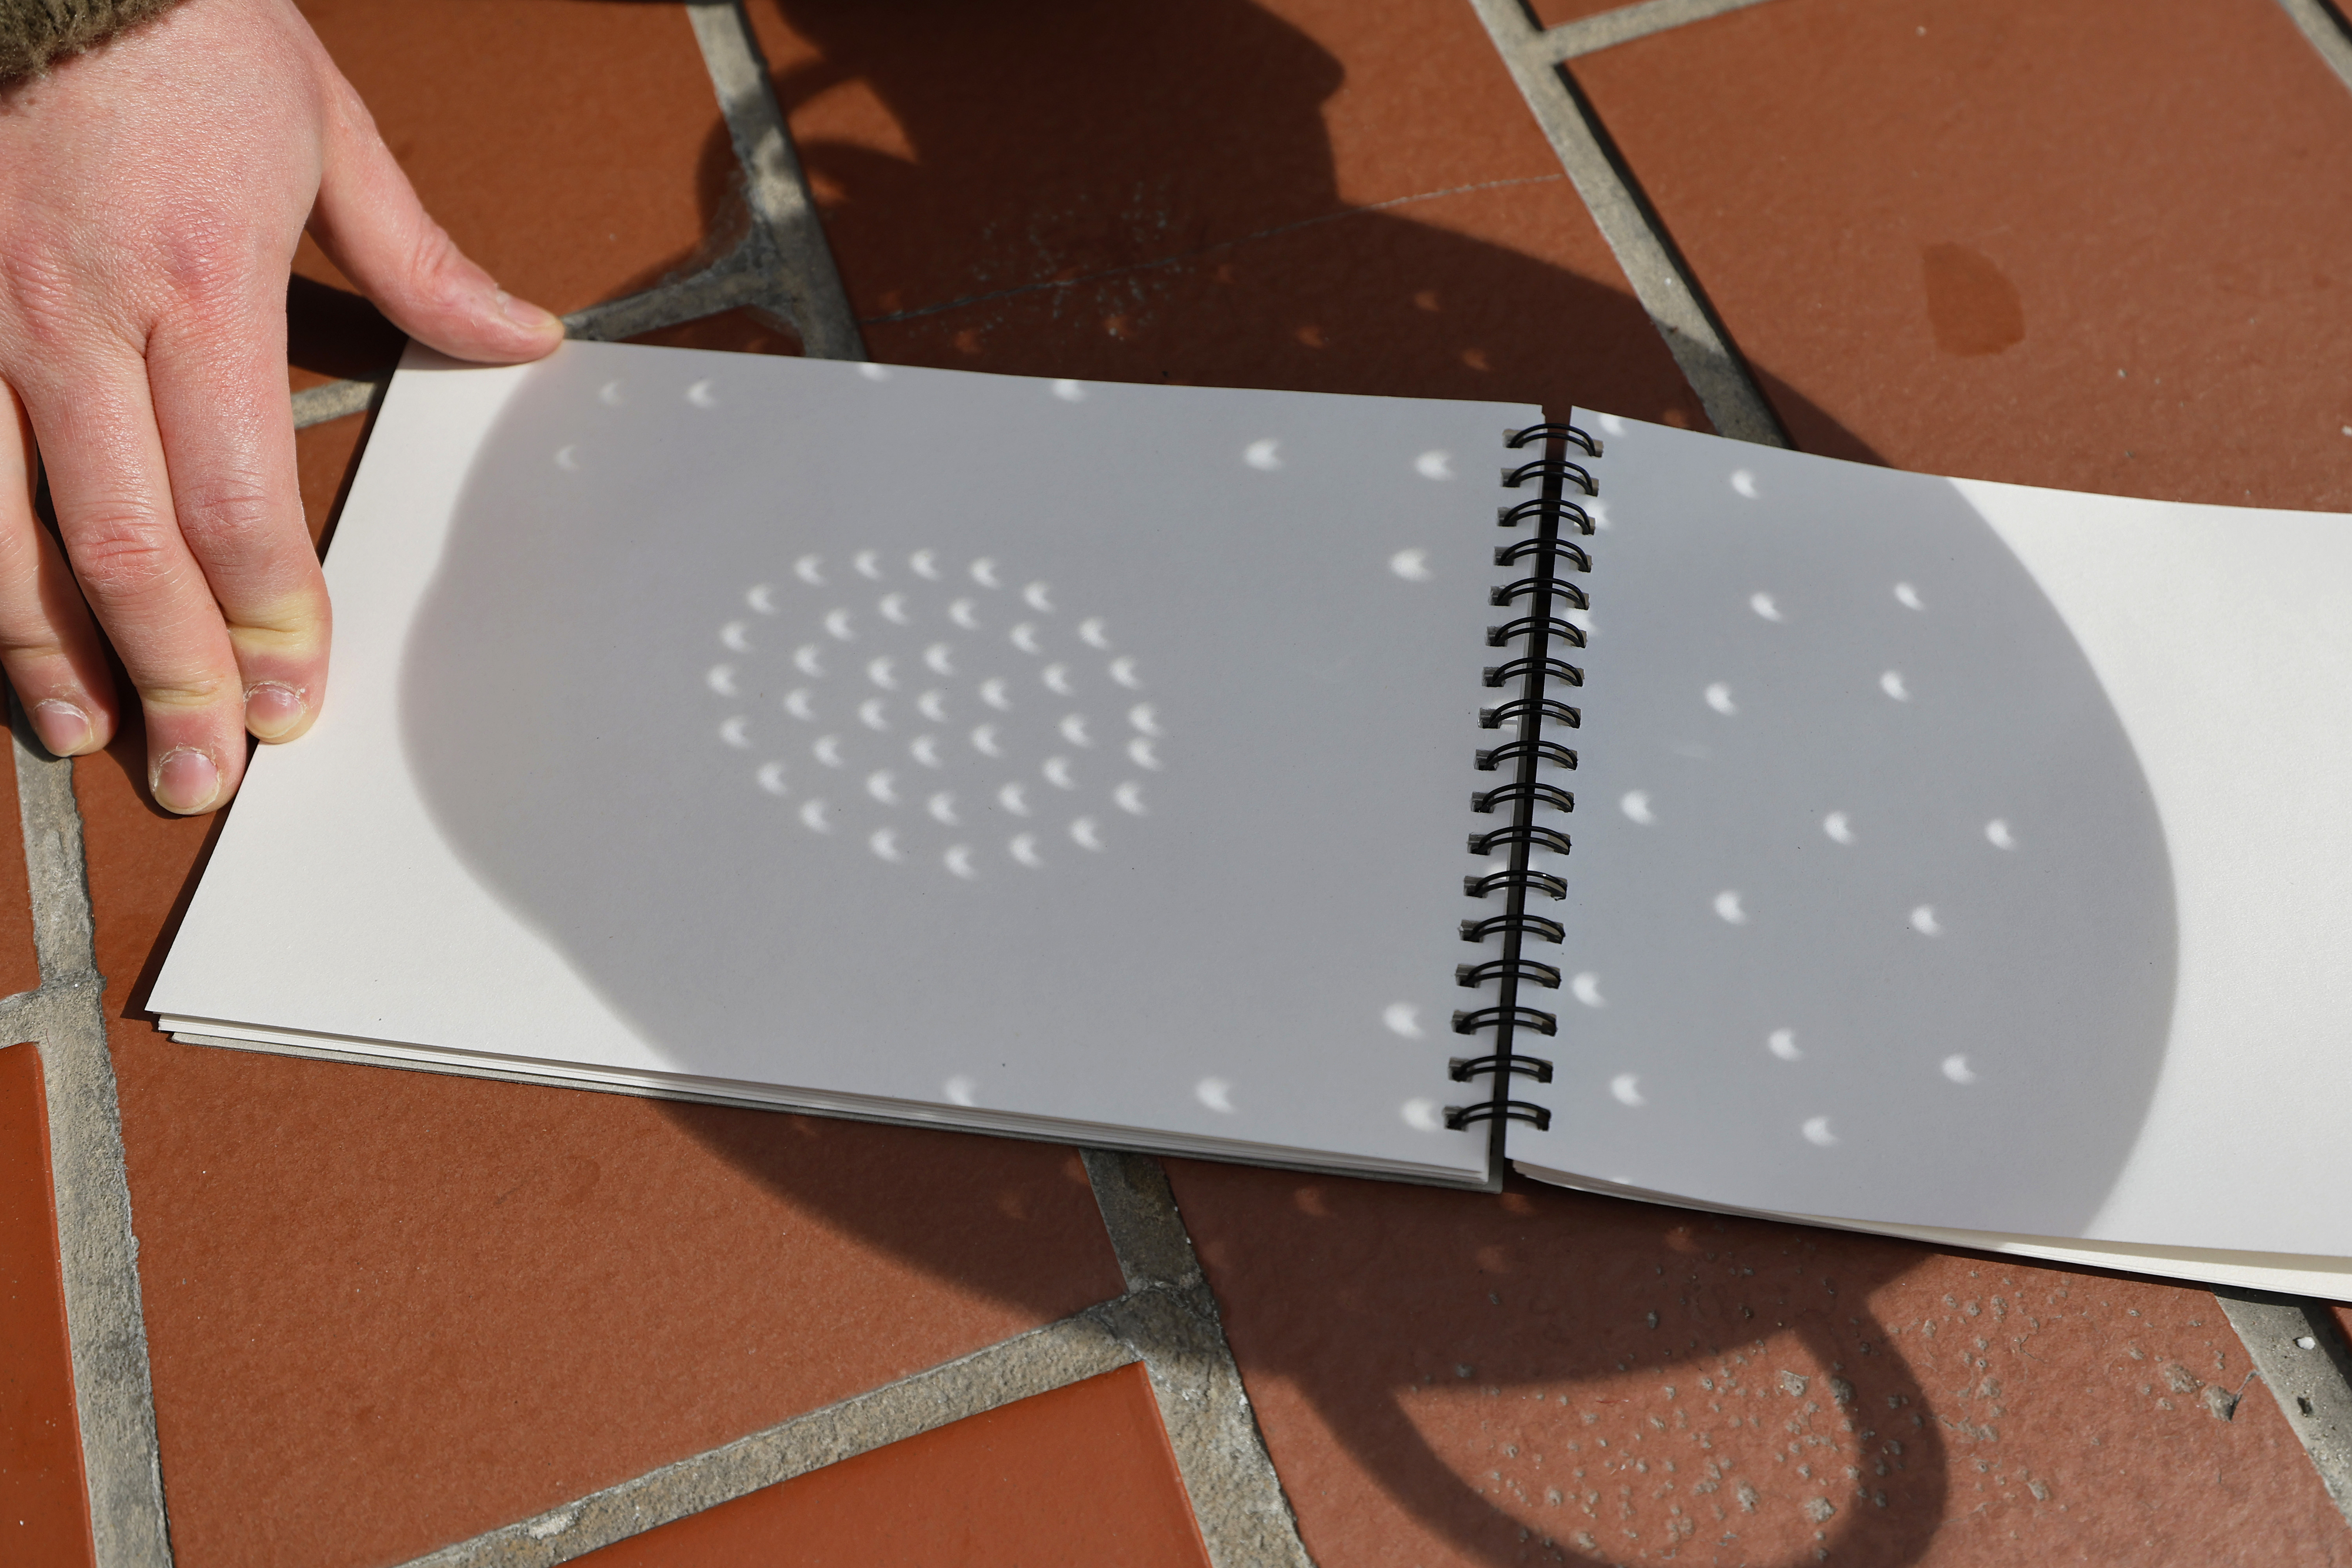 Hand holding a notebook with a shadow pattern cast on open blank pages